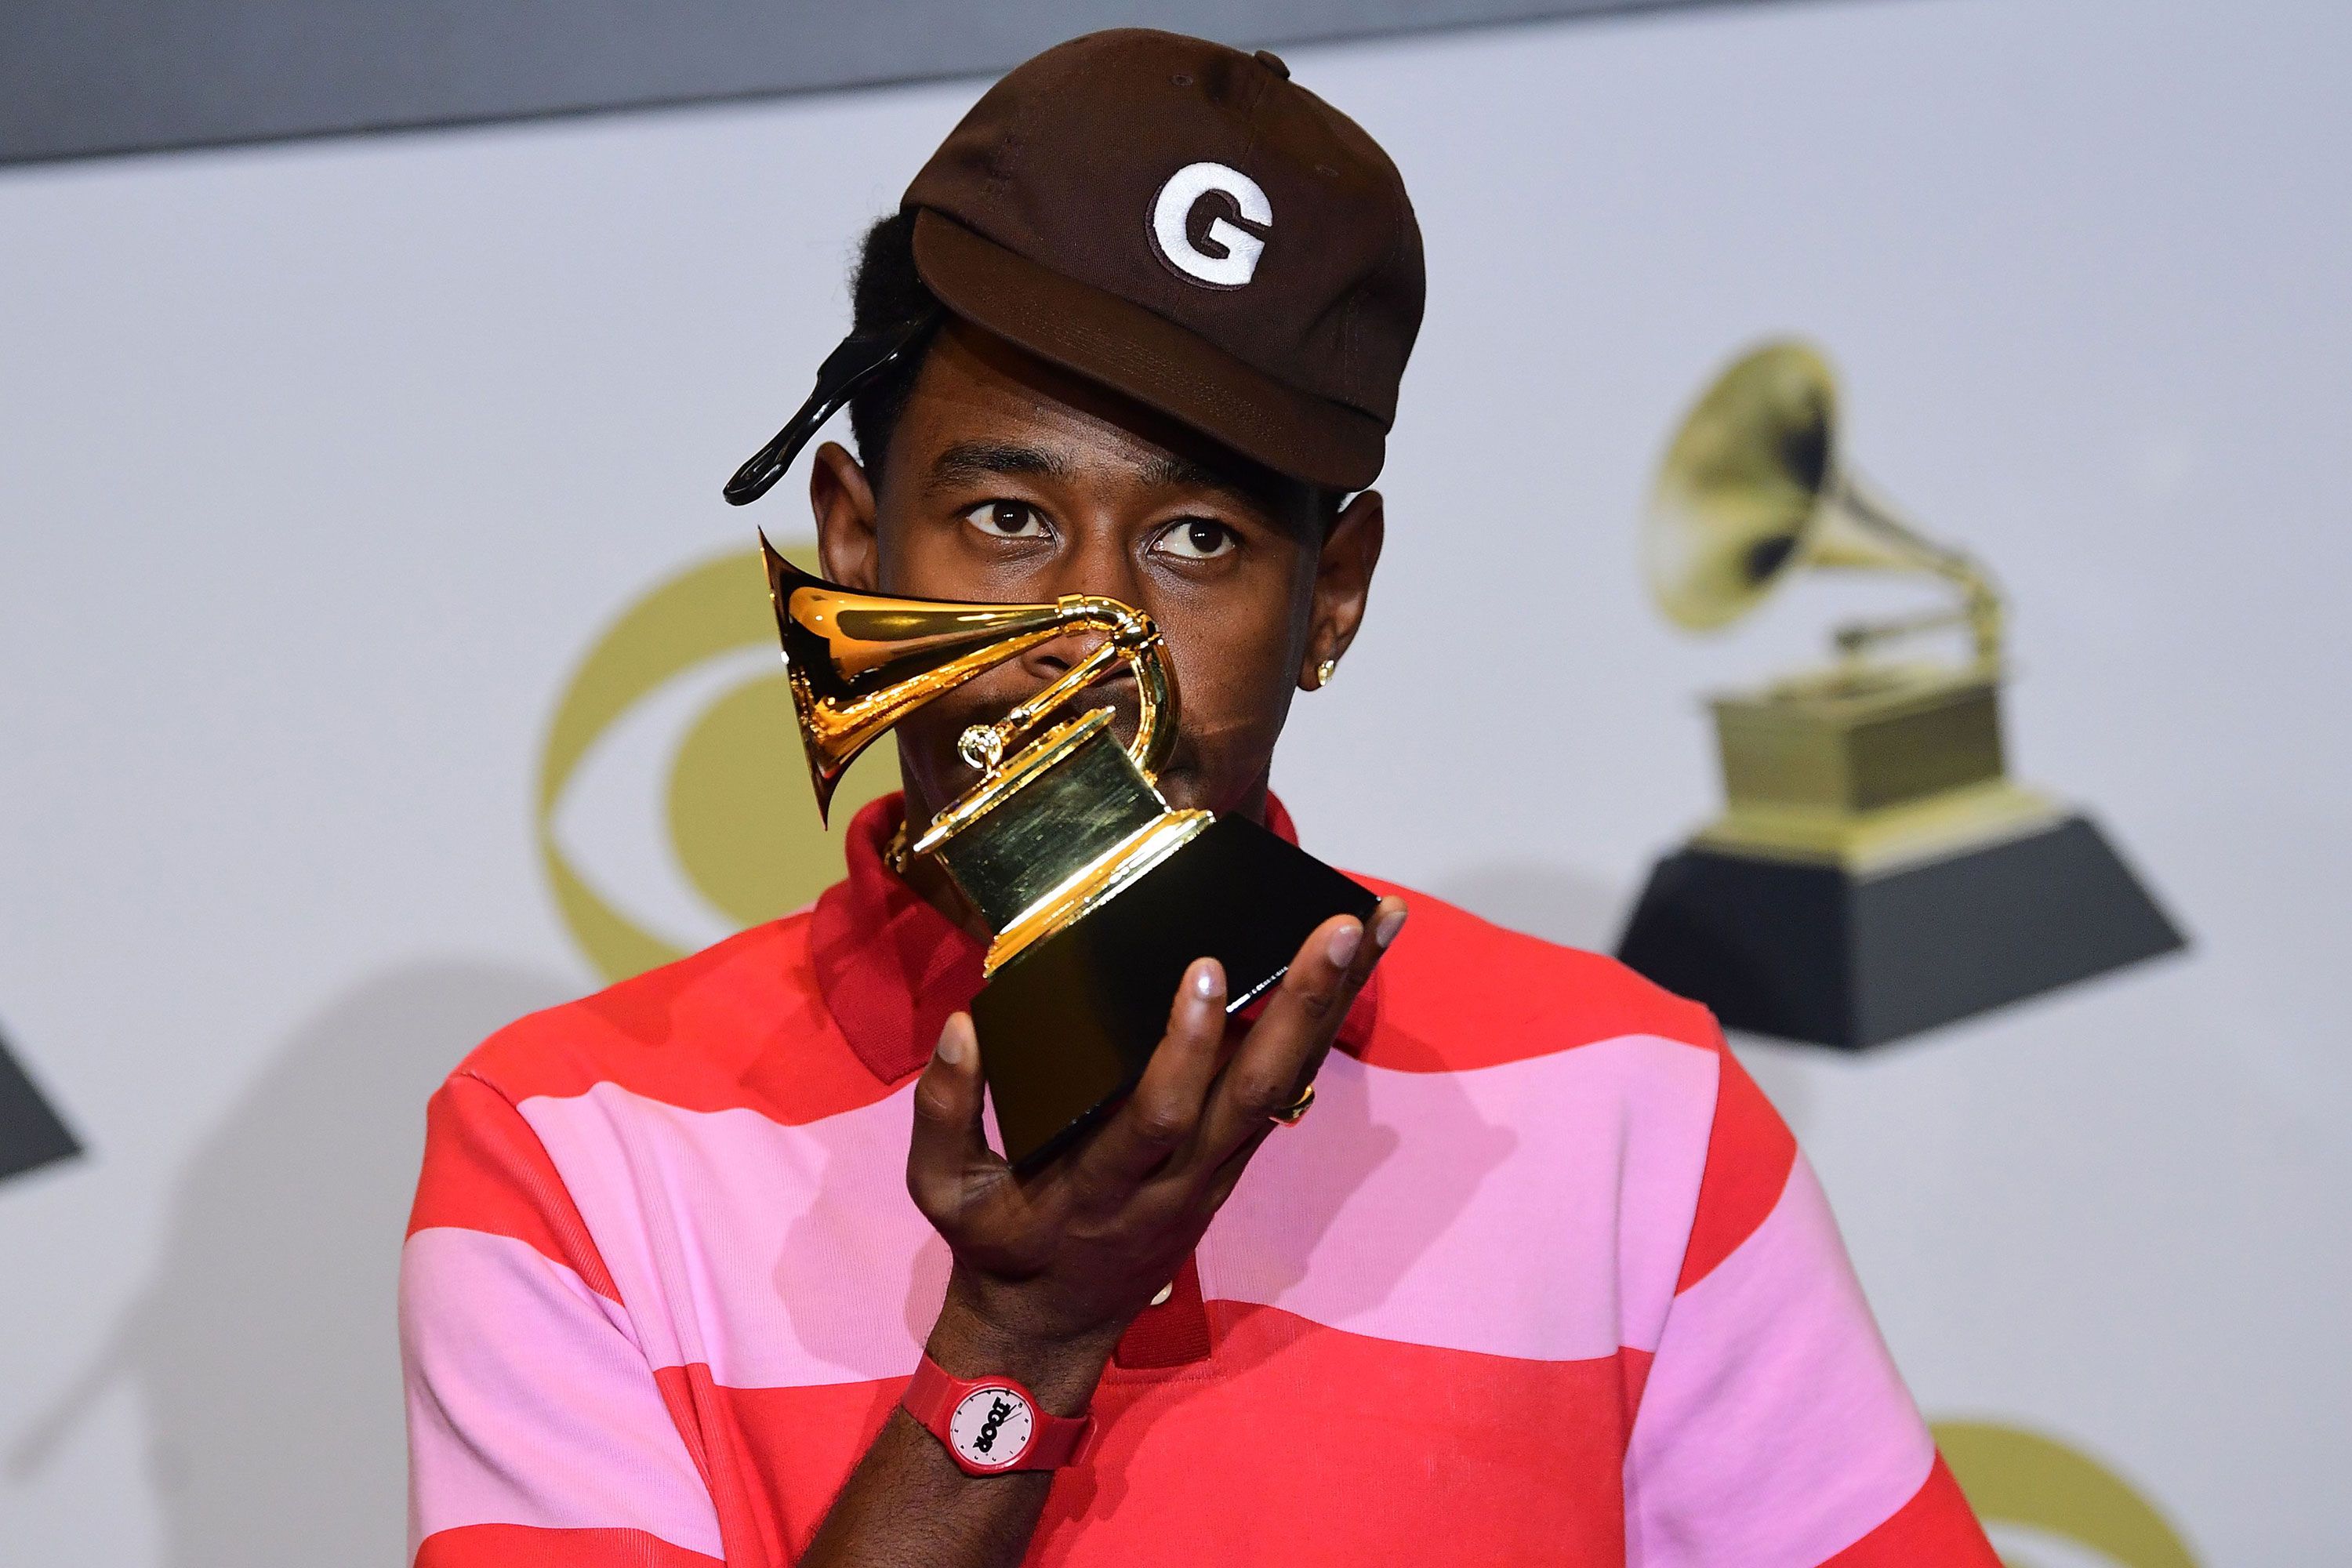 A chaotic way to hold a Grammy. : r/tylerthecreator